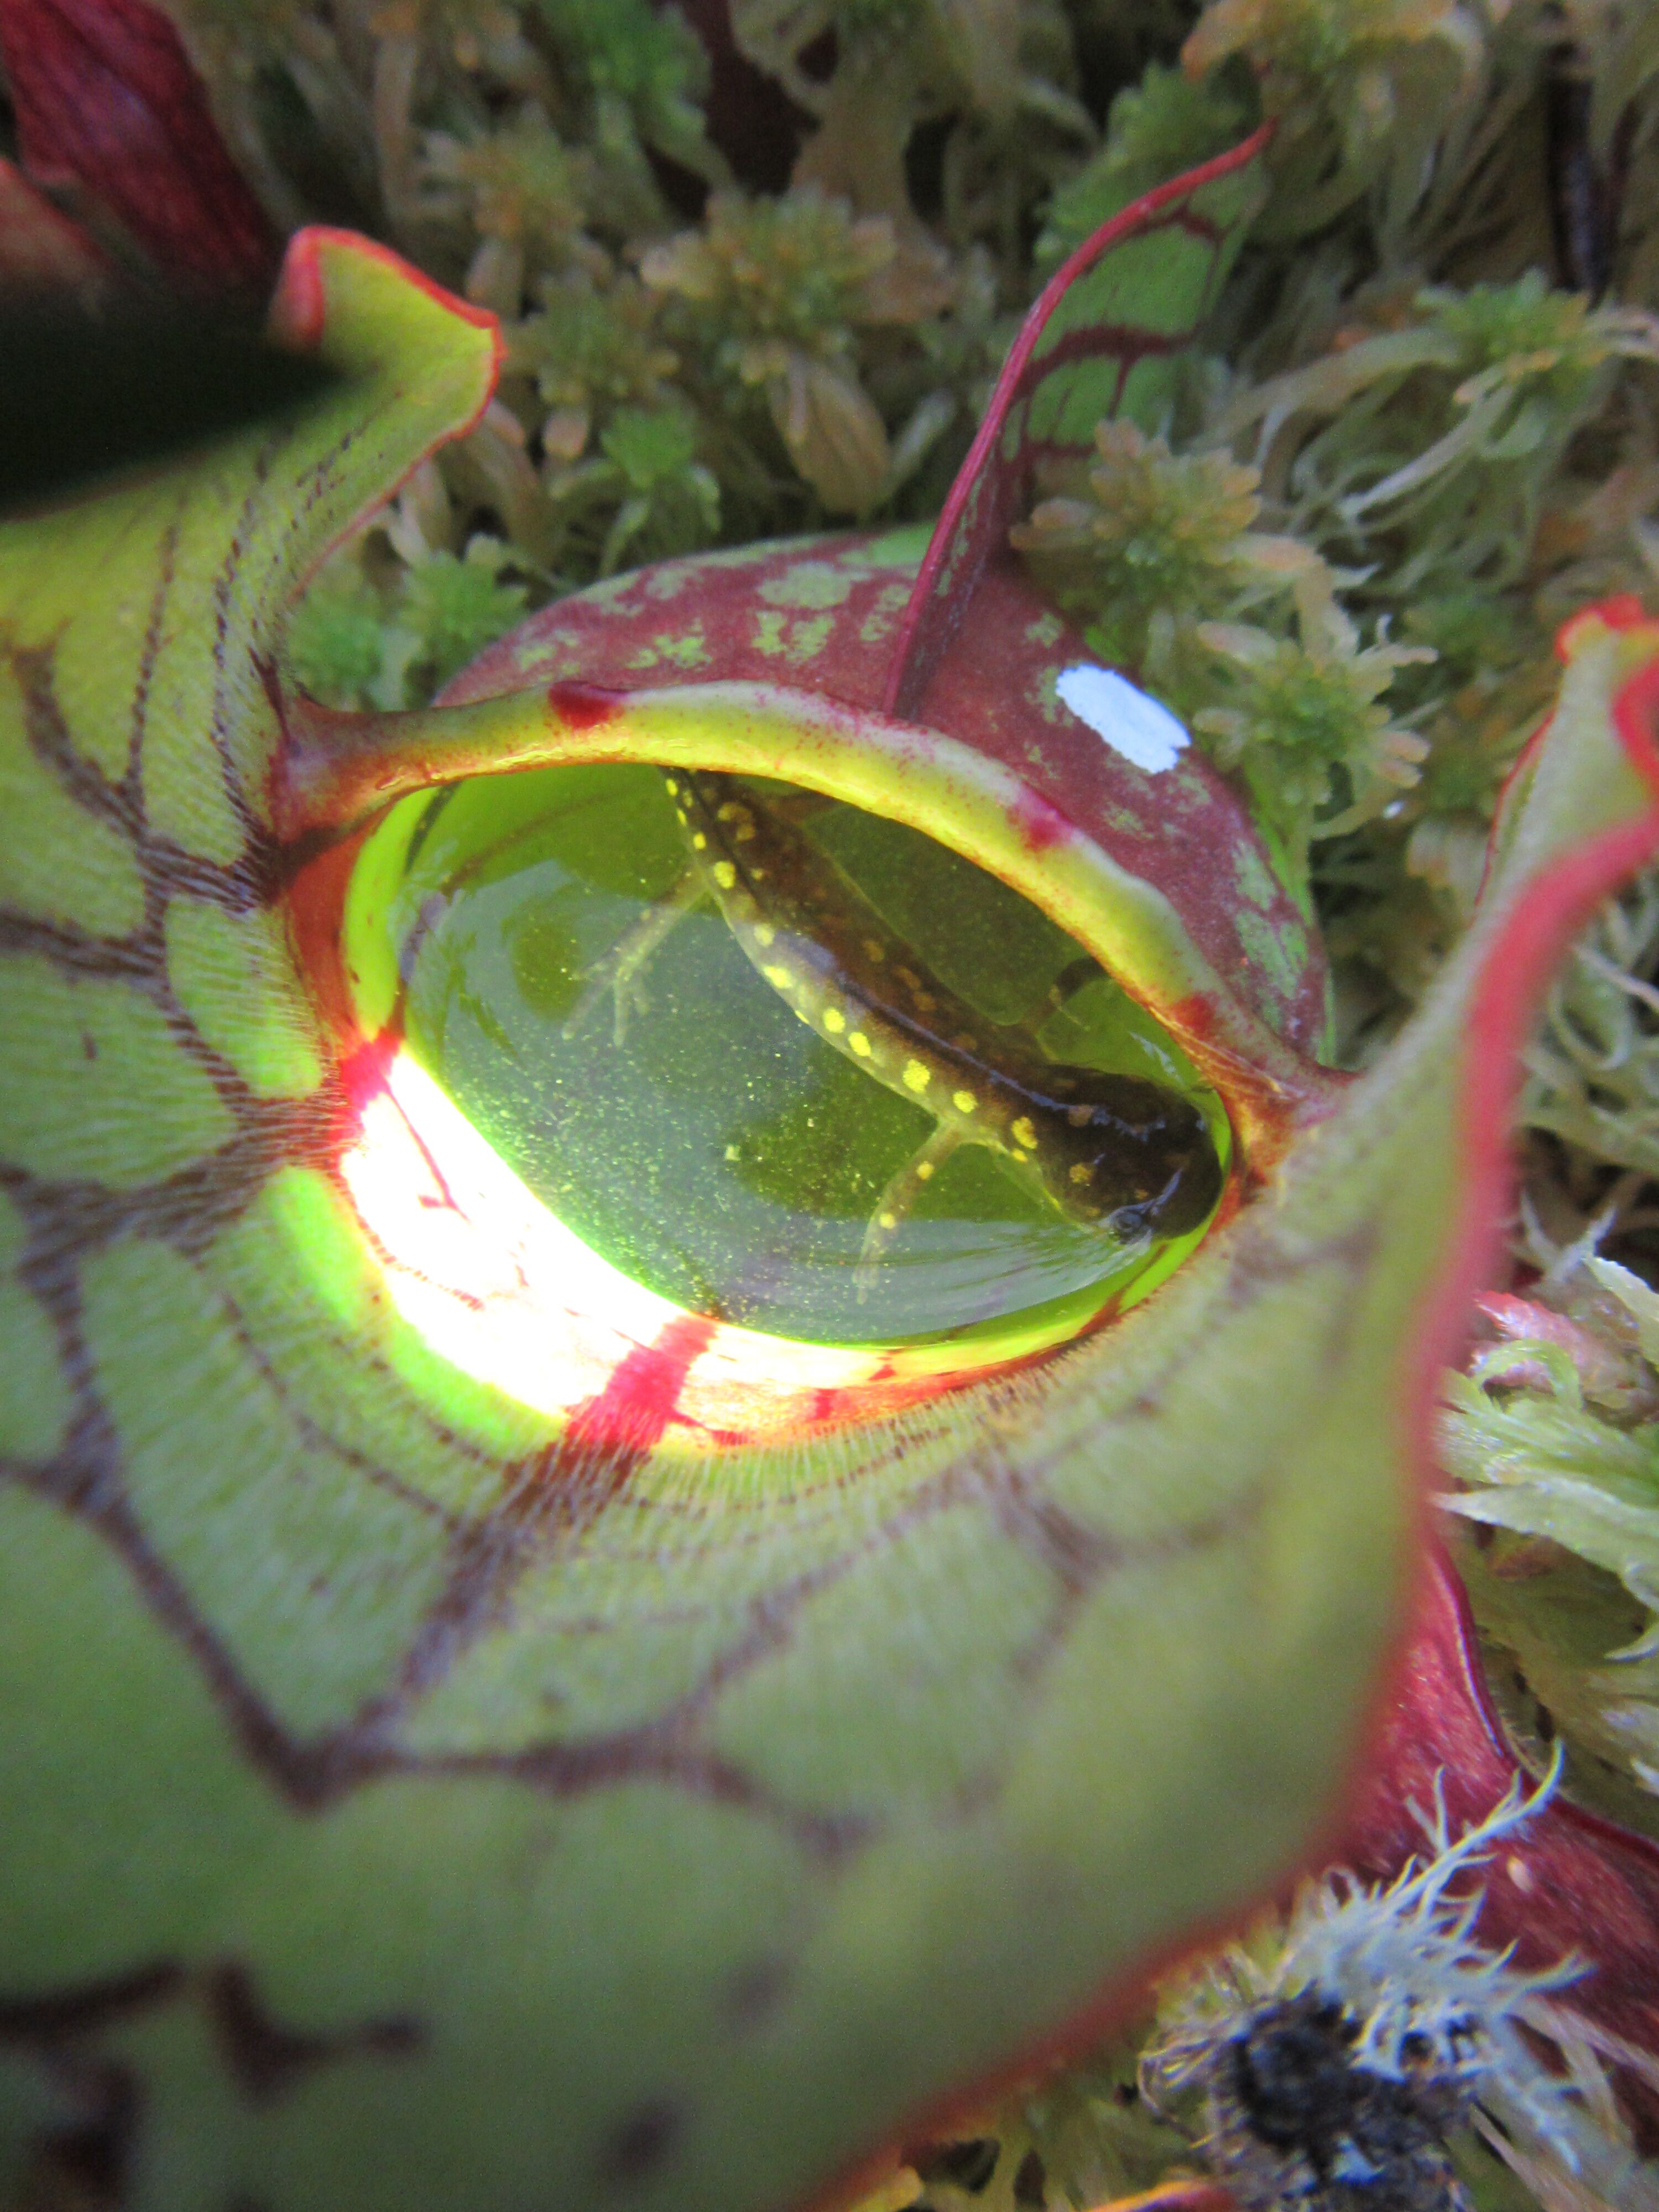 Salamander in a pitcher plant